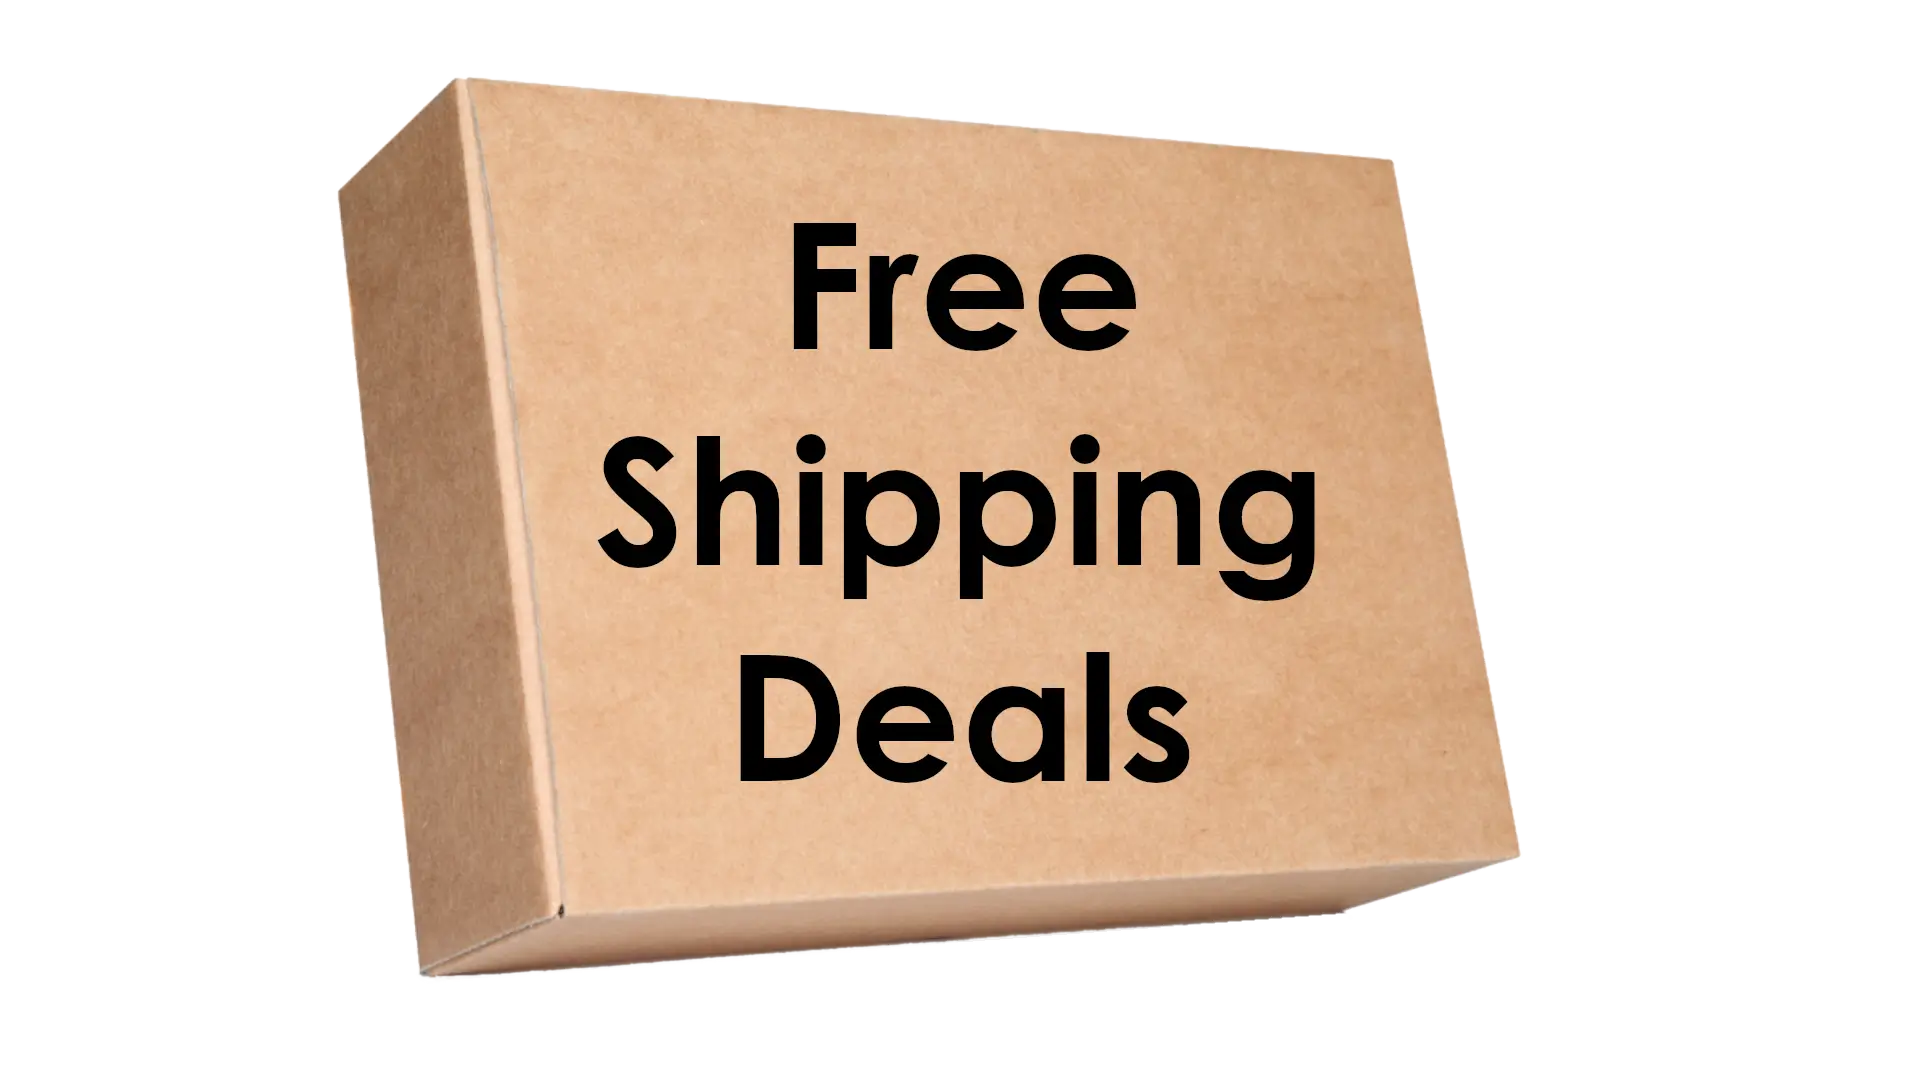 Free Shipping Deals Available